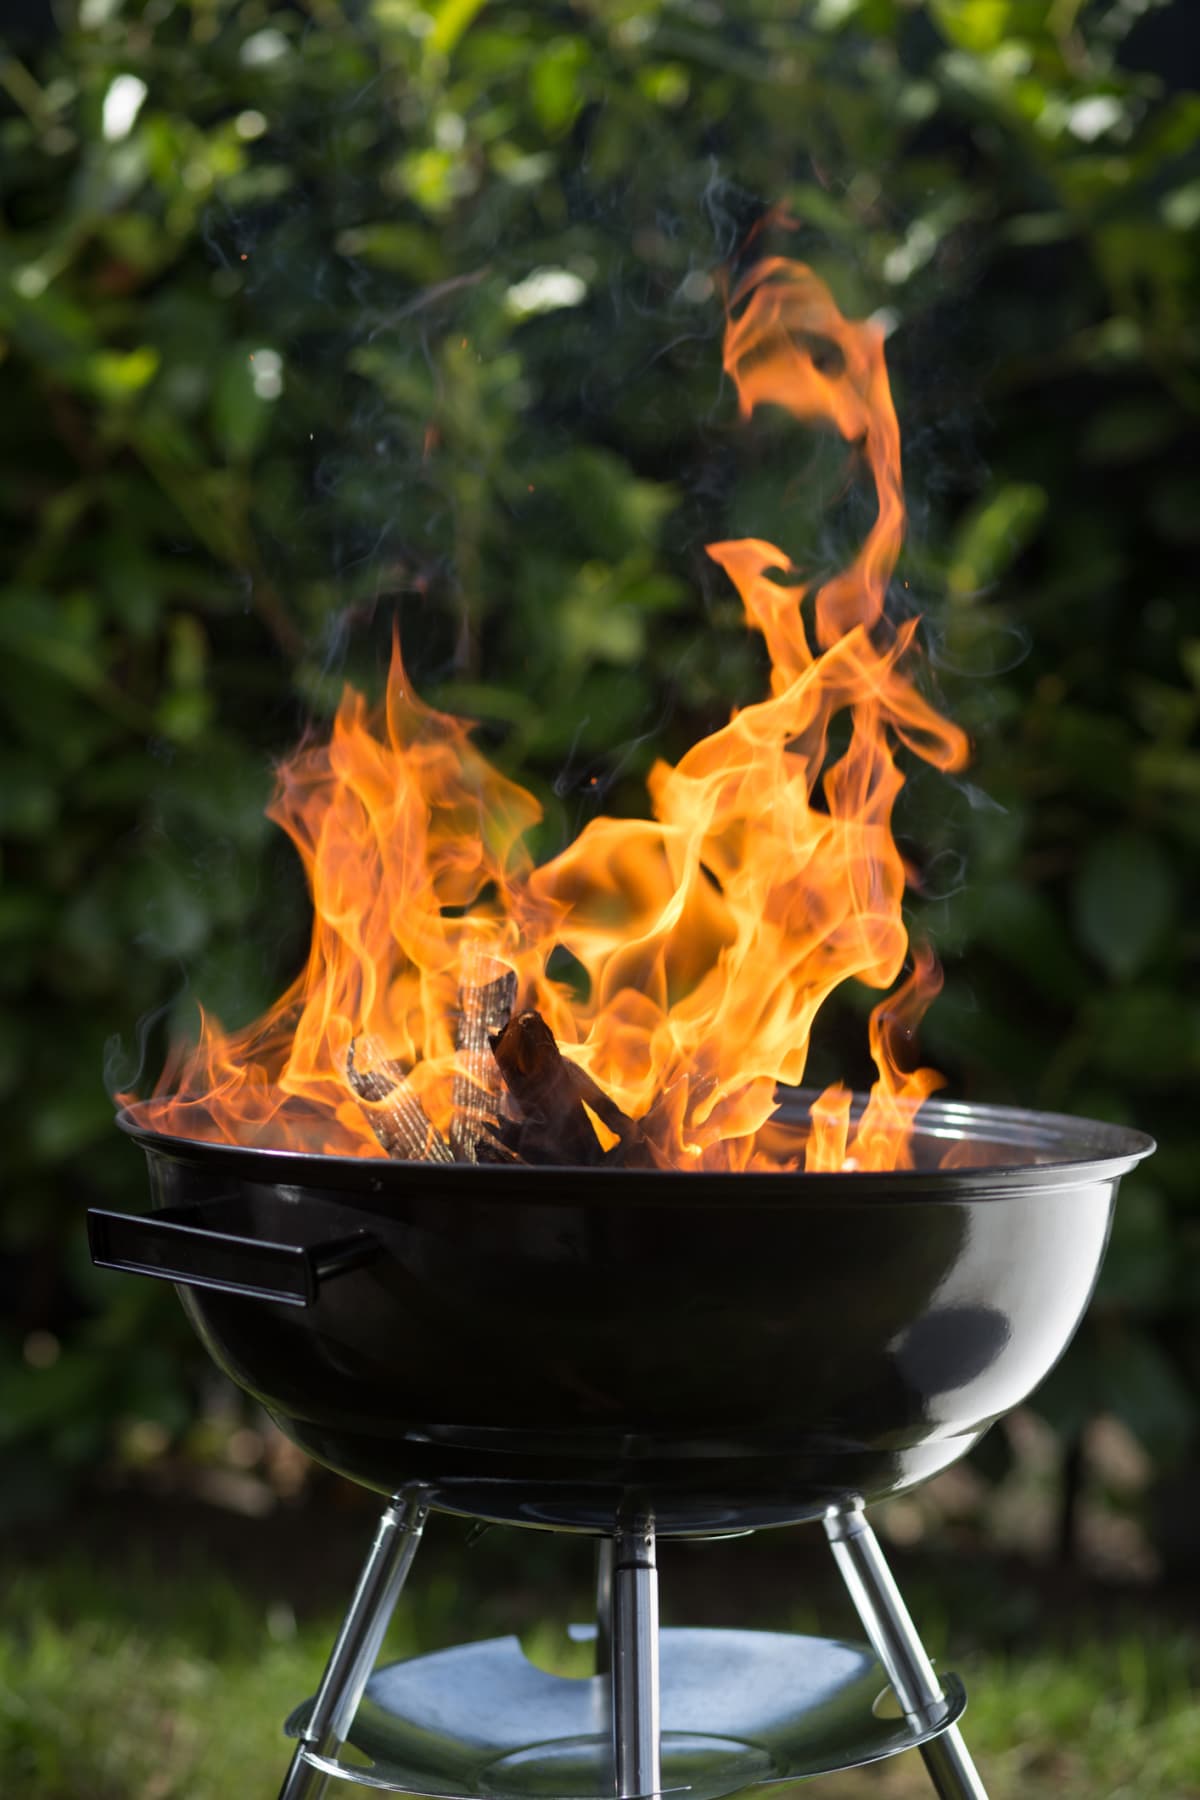 Preparation of fire and embers for barbecue or grill